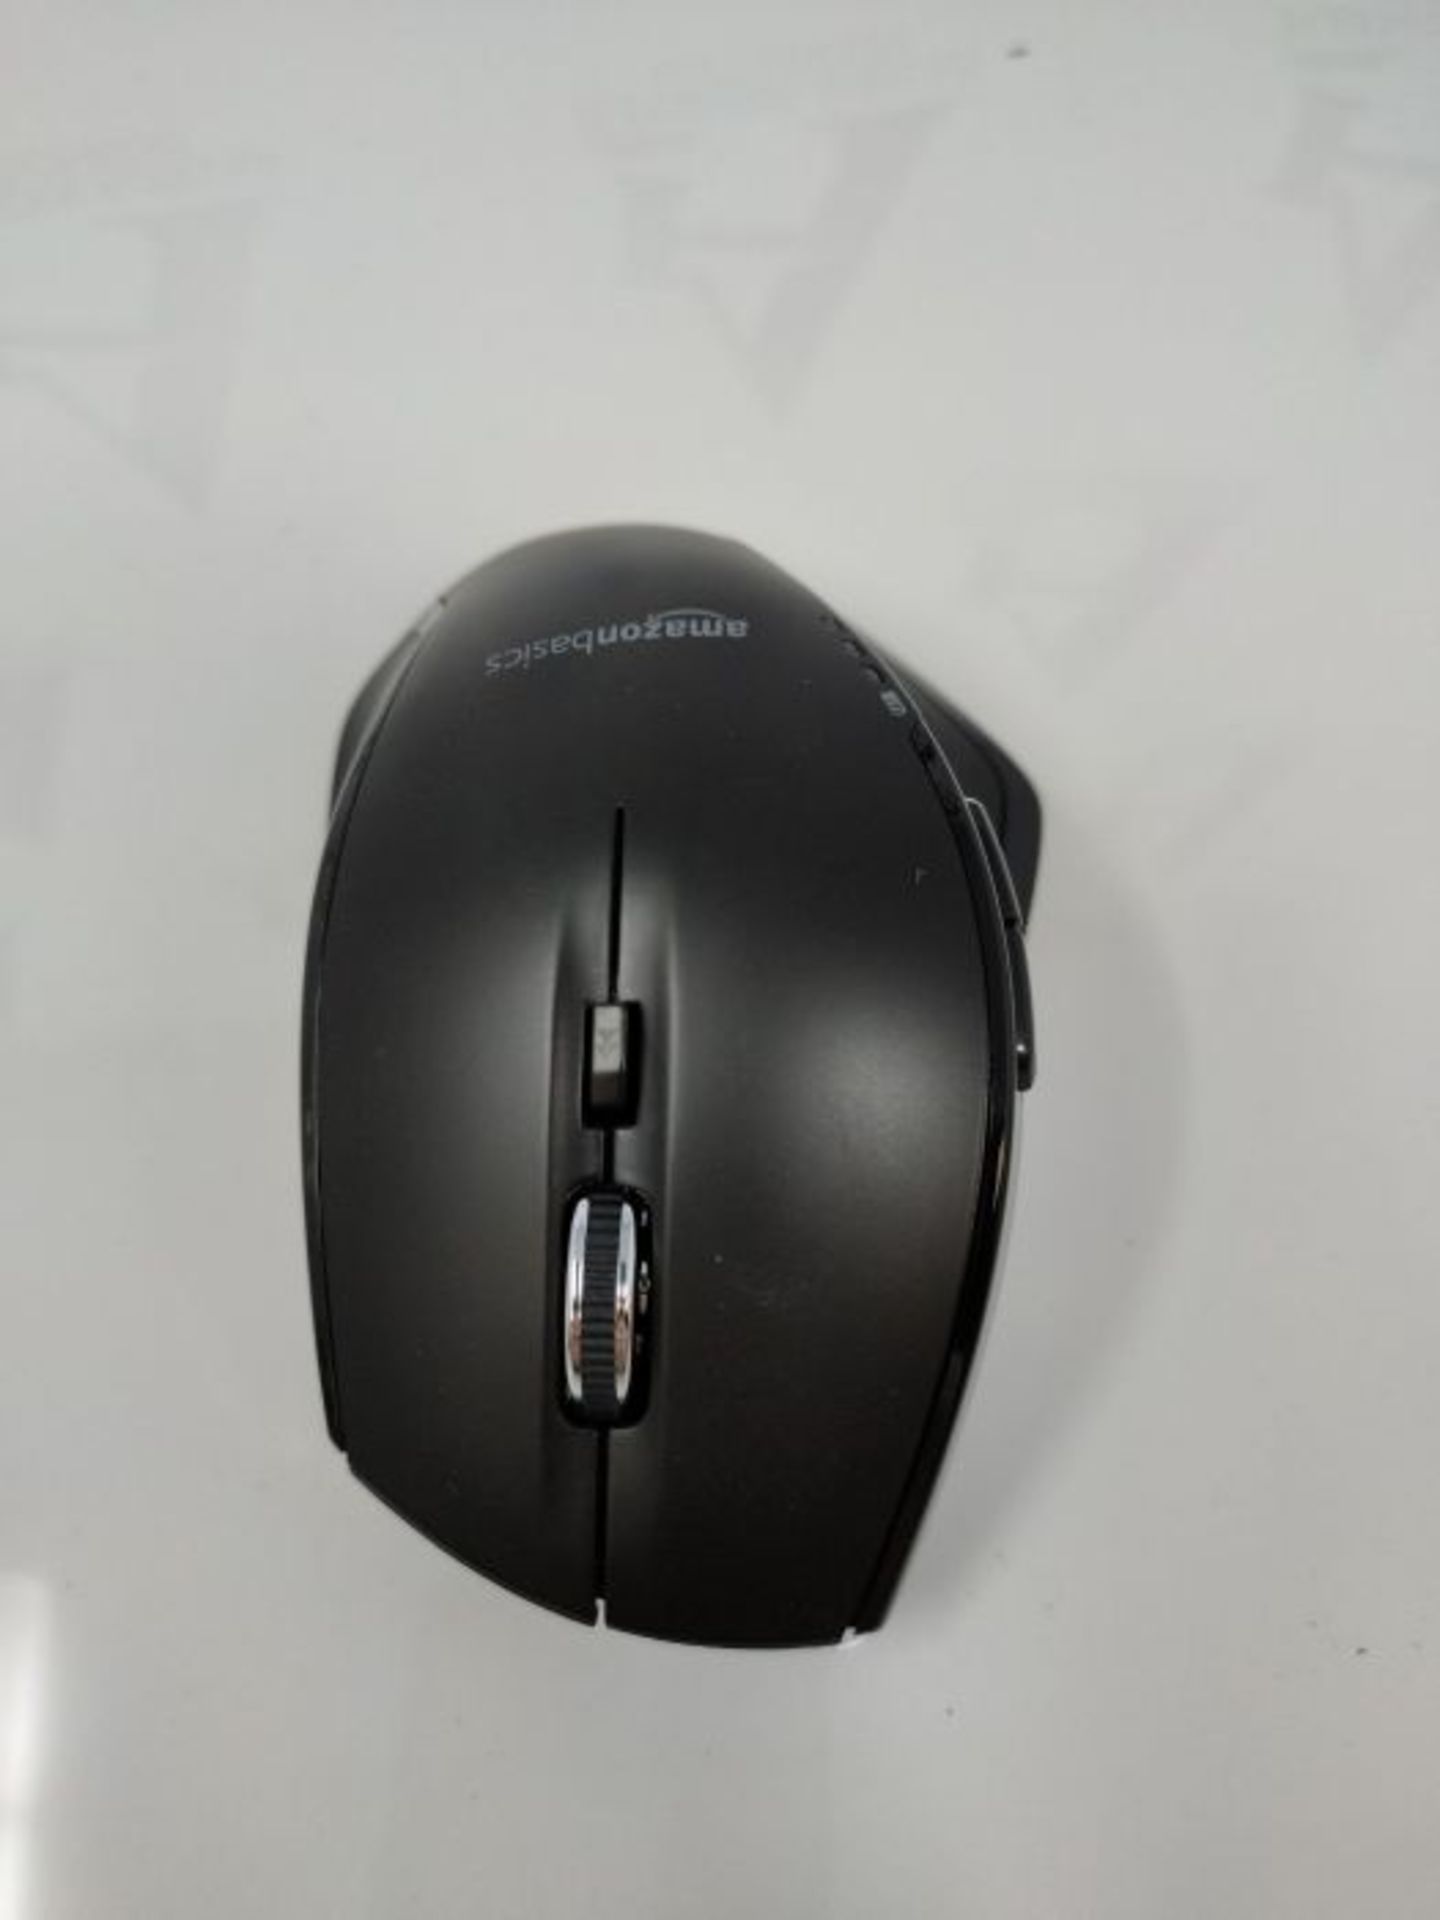 [INCOMPLETE] Amazon Basics - Ergonomische kabellose Maus mit Schnell-Scrolling, normal - Image 2 of 3